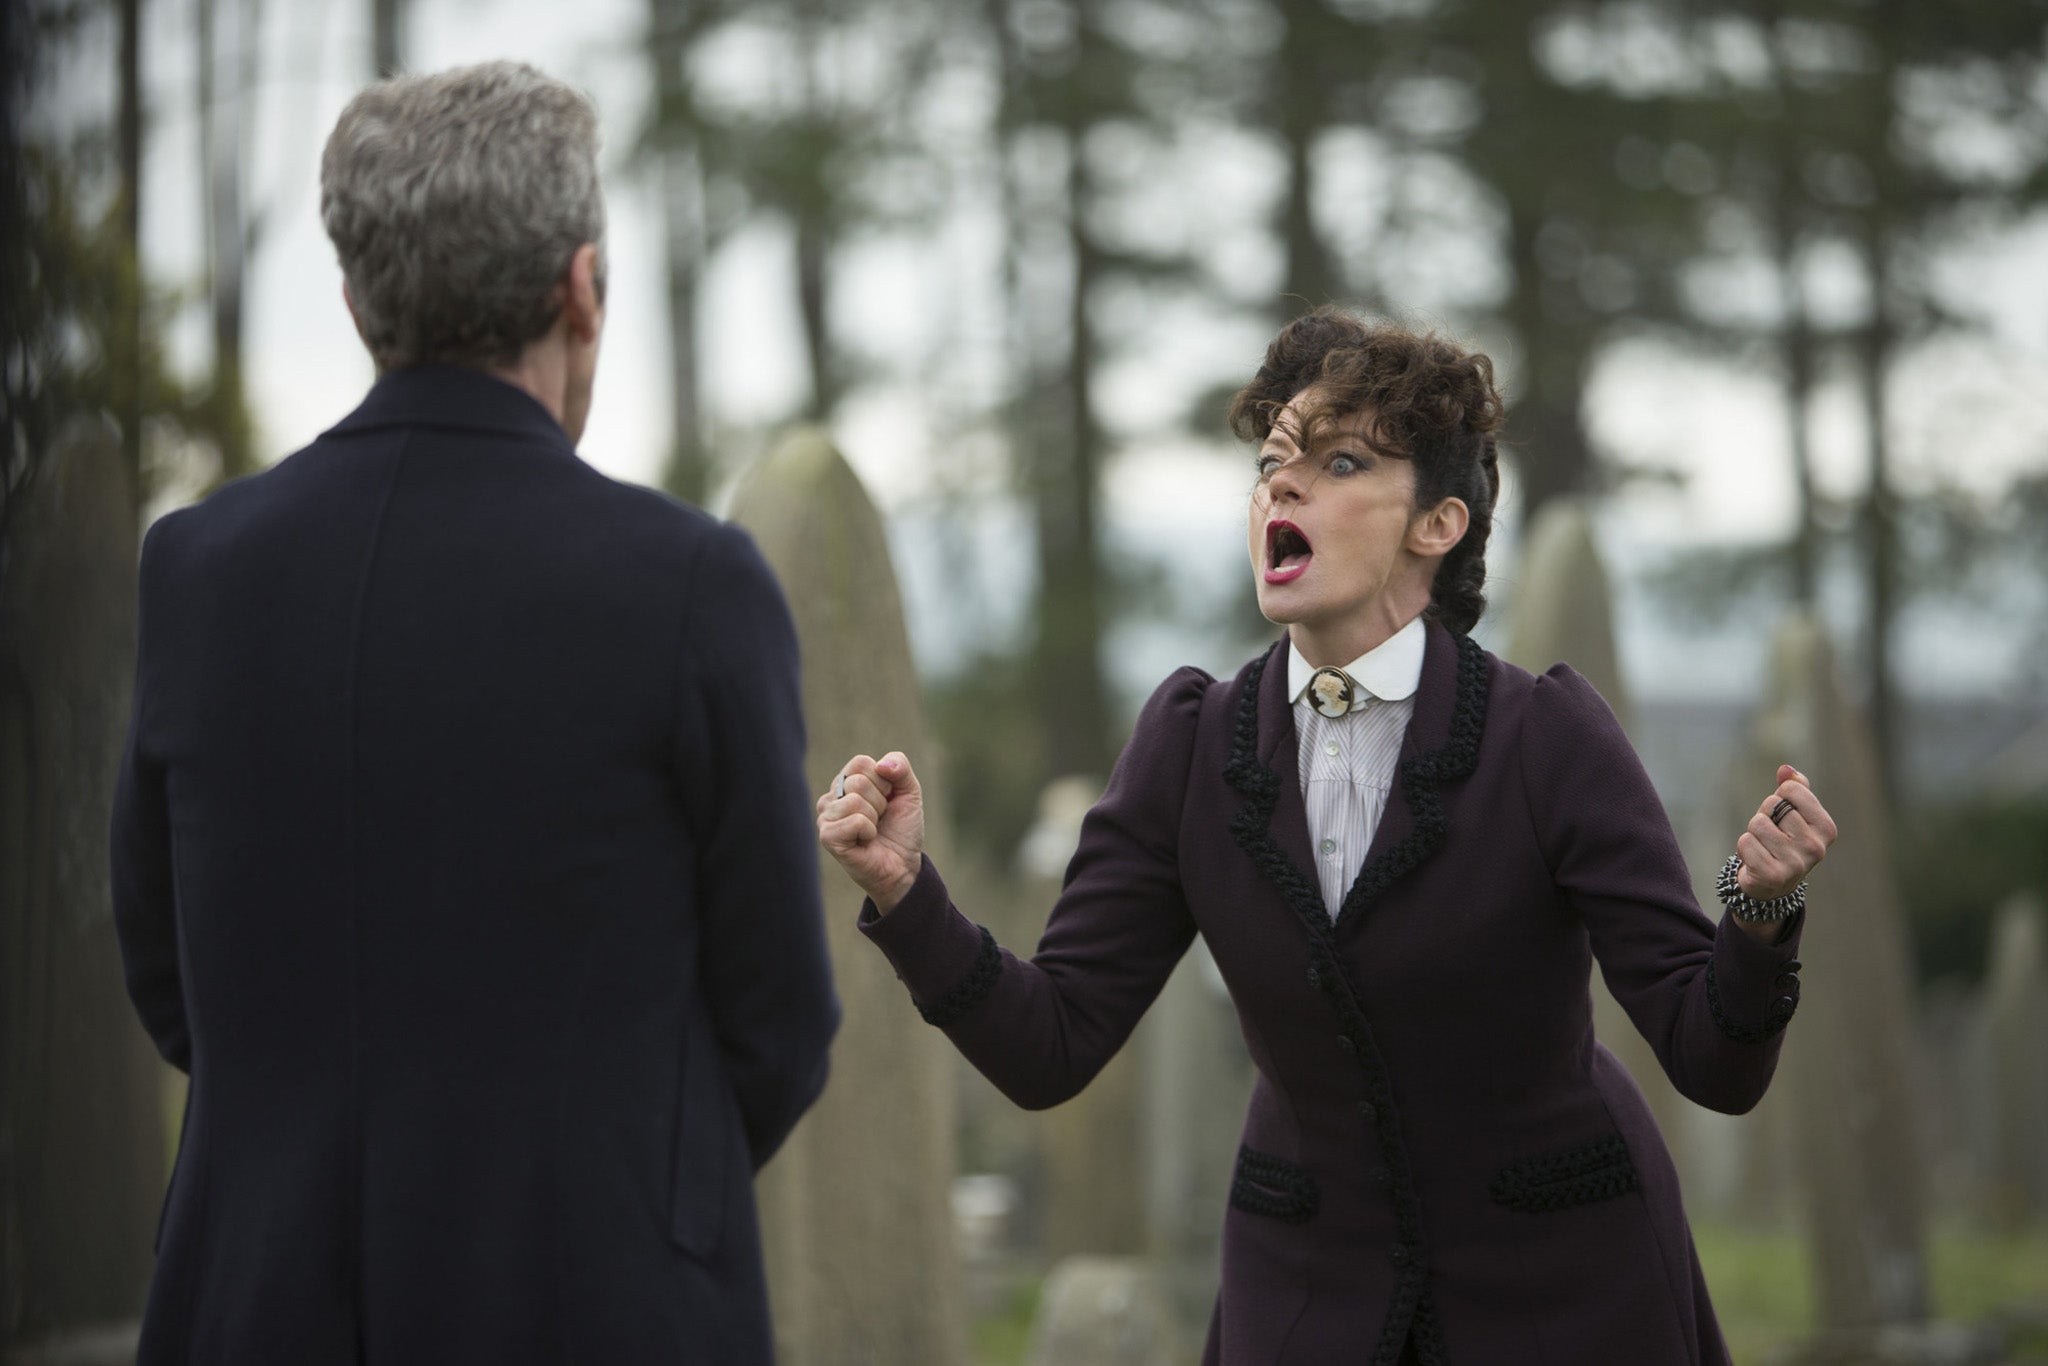 Missy screams at The Doctor